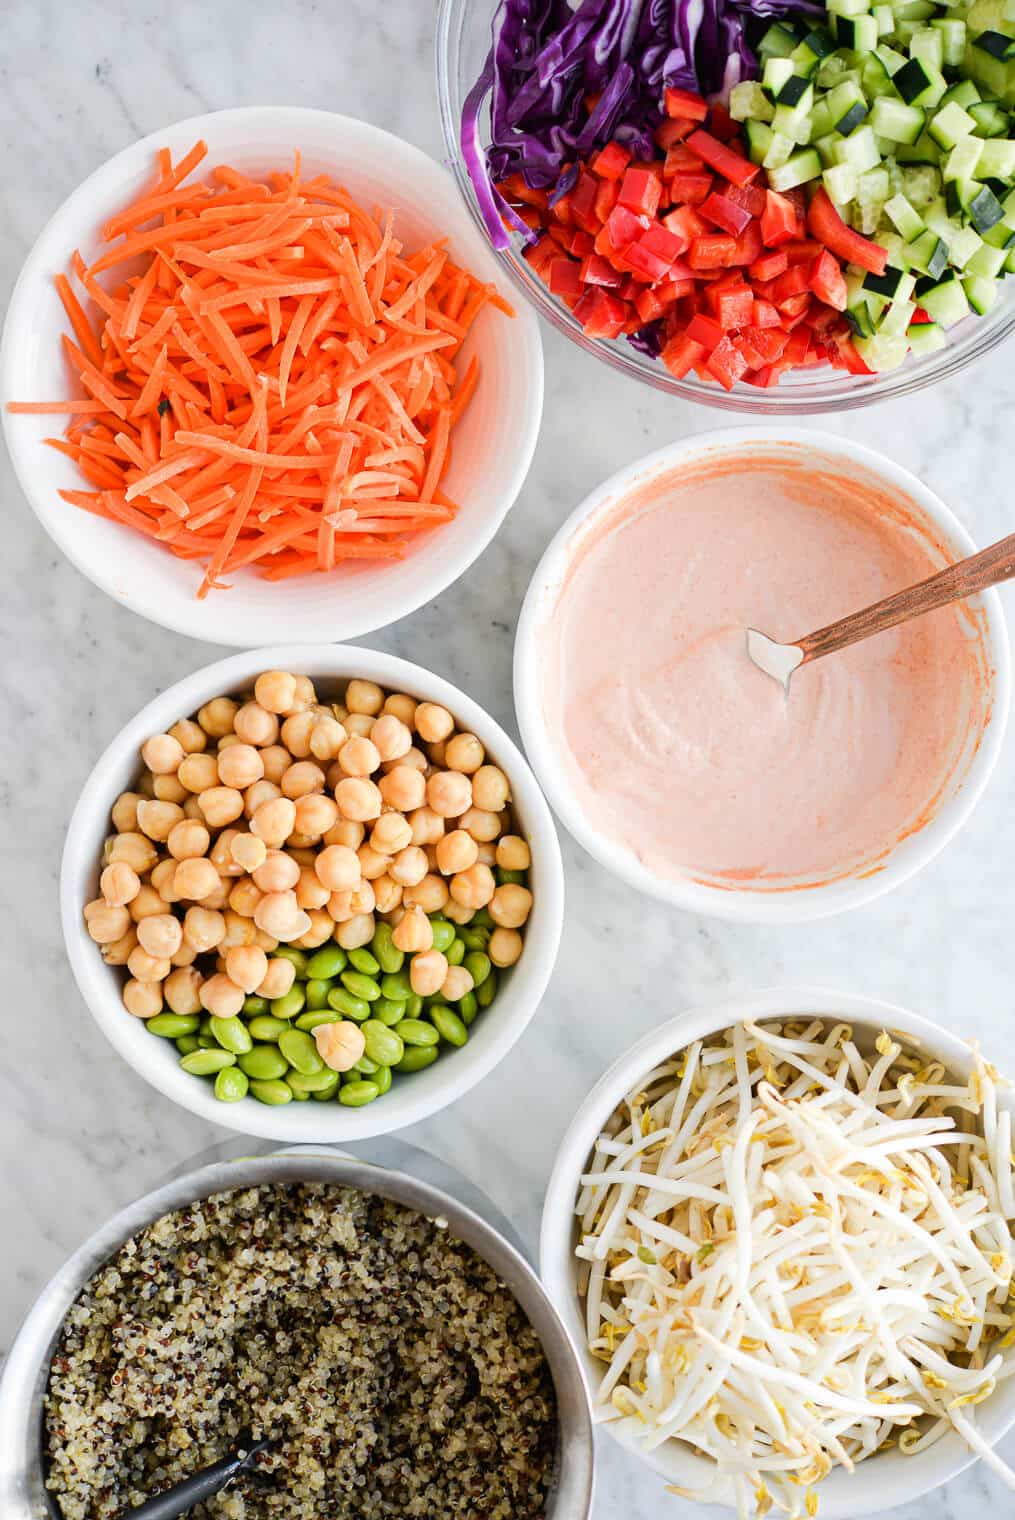 the makings of a thai red curry buddha bowl (a bowl of quinoa, mug bean sprouts, edamame and chickpeas, fresh, raw veggies, and a bowl of creamy thai red curry sauce sitting on a marble surface